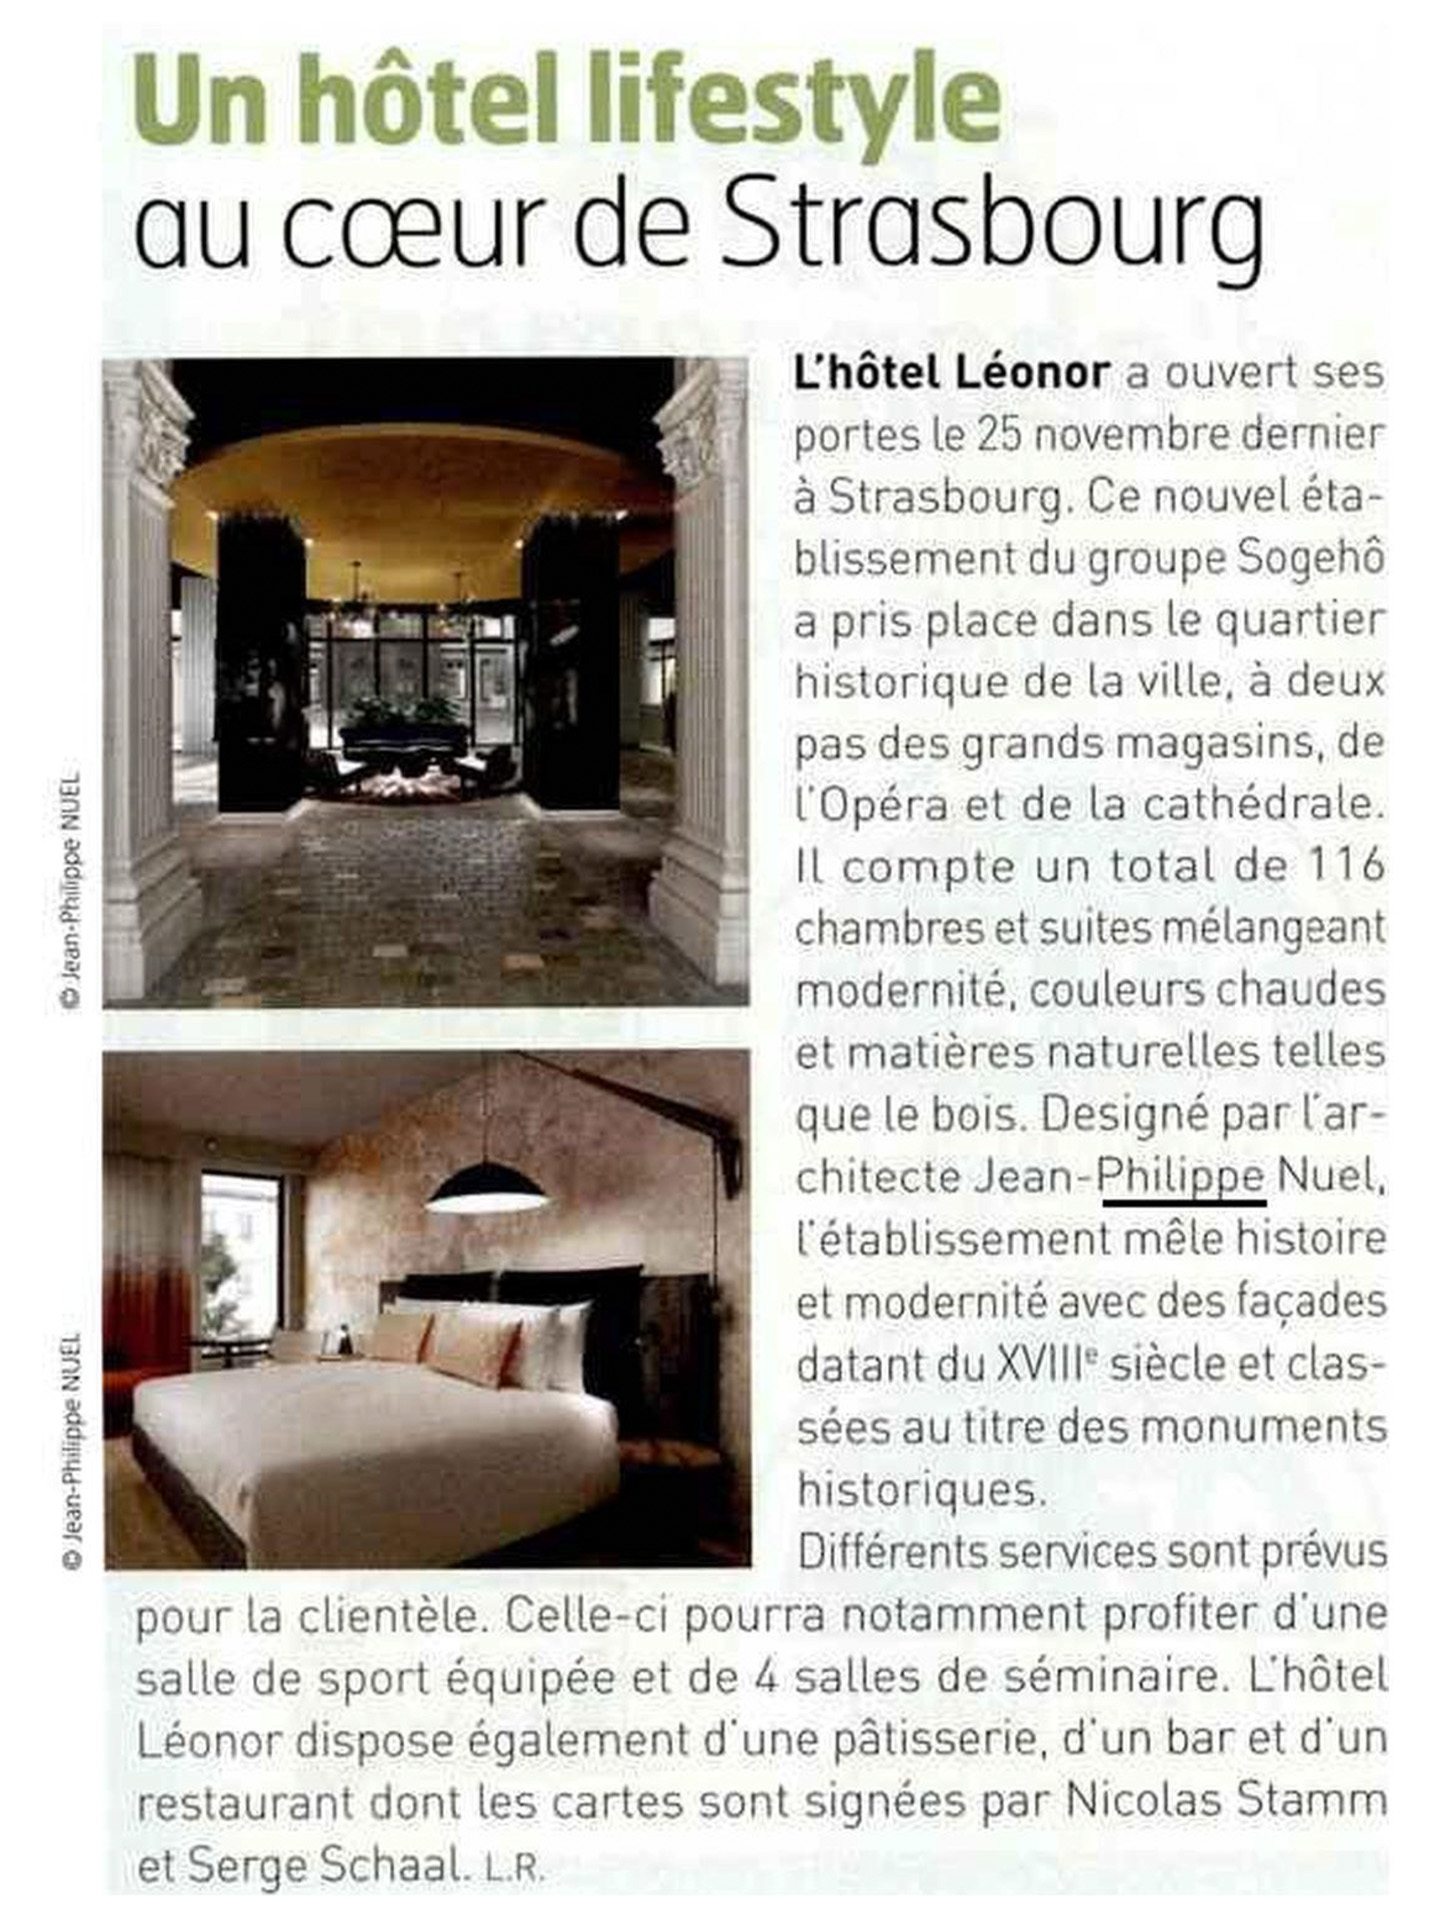 article in the hotel industry about the opening of a new luxury hotel in Strasbourg the hotel LEONOR of the group sogeho which was redone by the studio jean-philippe nuel, designer, french interior architect, interior design